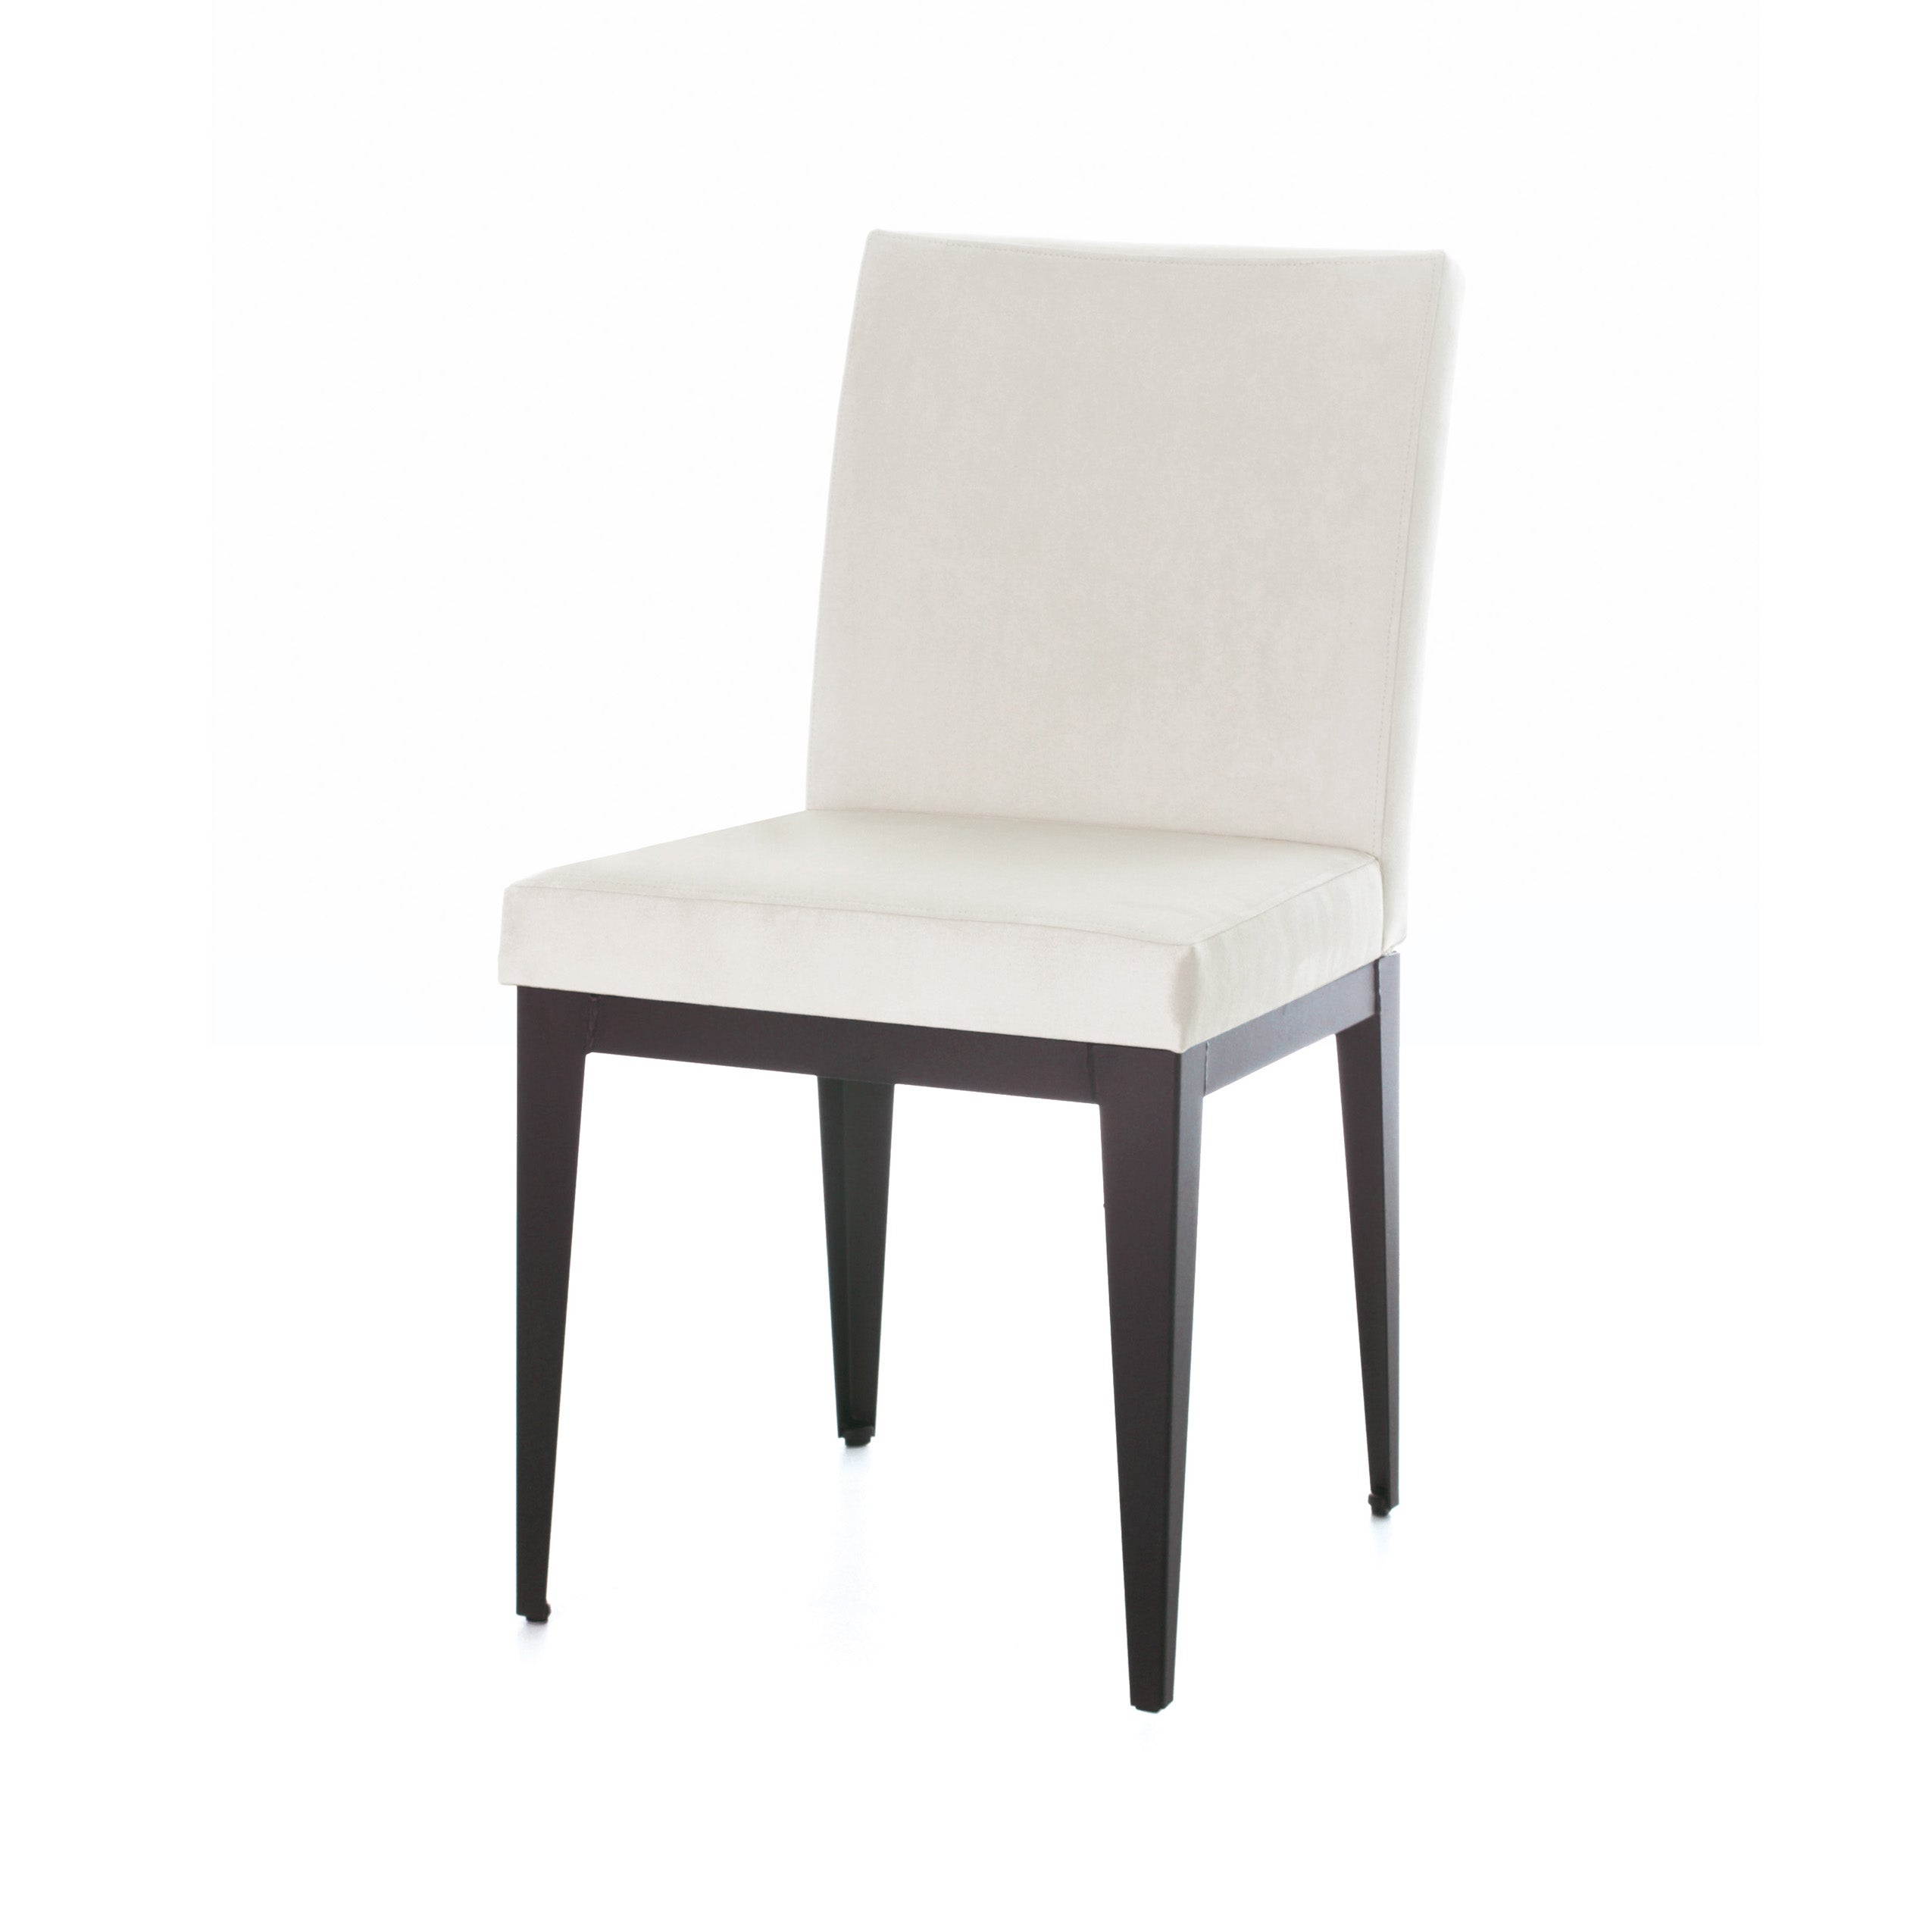 Pedro Dining Chair